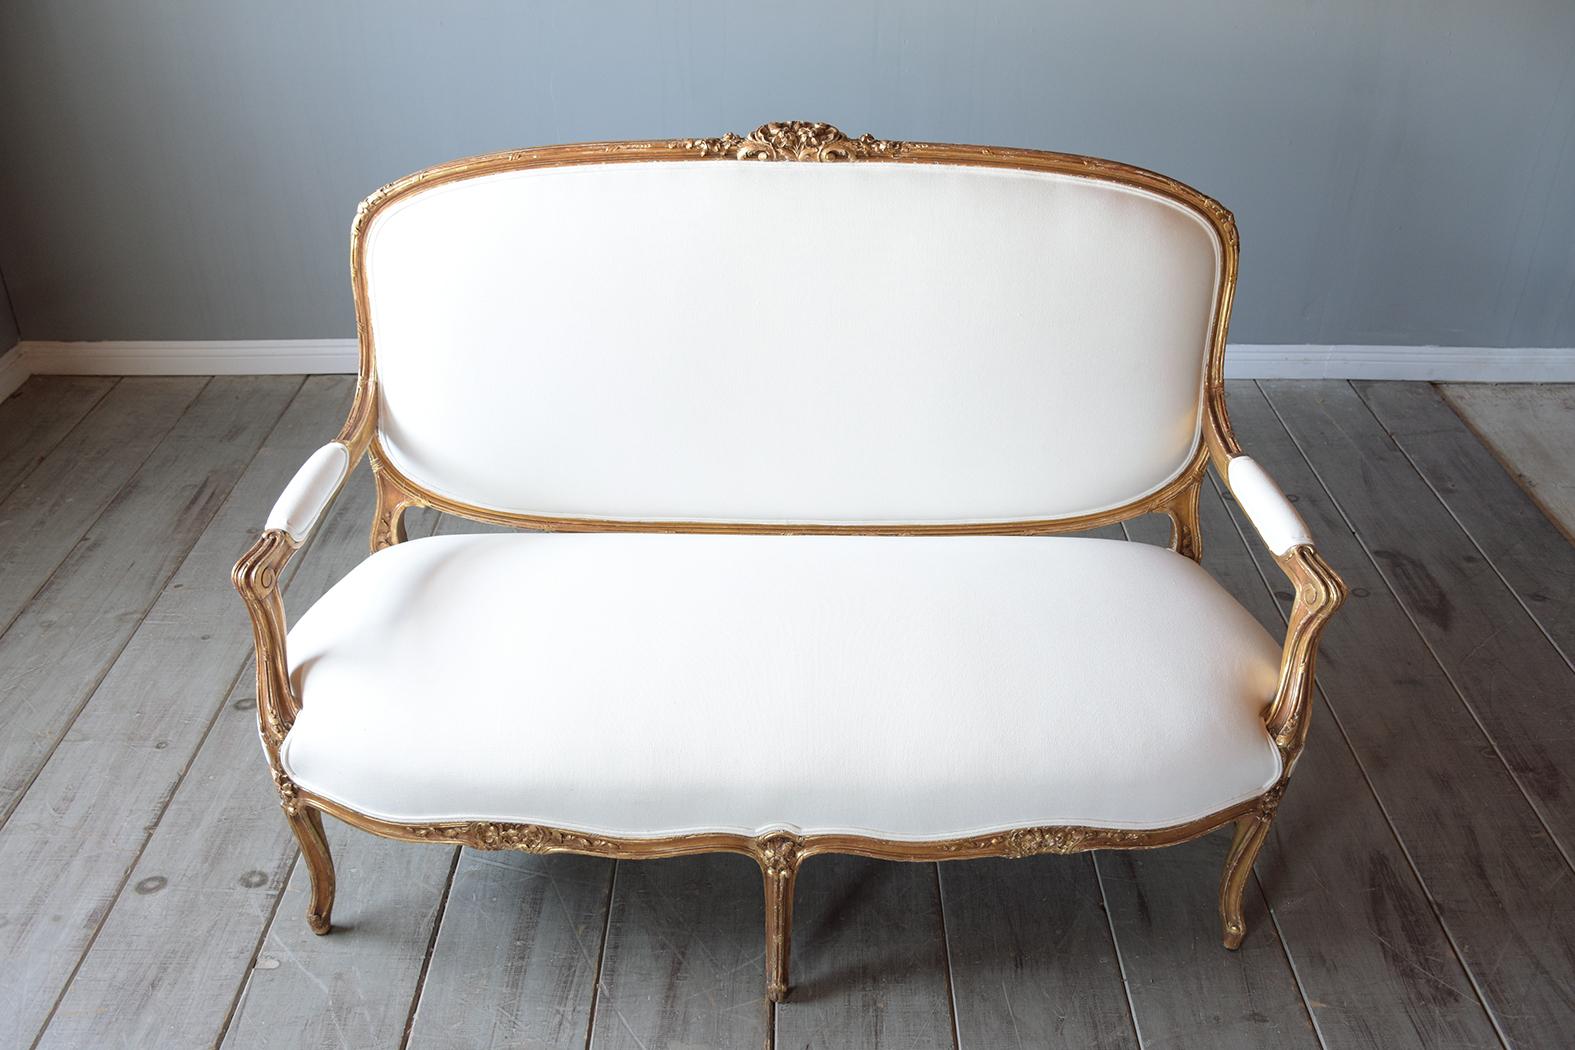 This 19th-century Louis XVI sofa is handcrafted out of maple wood and has been completely restored by our team of expert craftsmen. This antique sofa features a hand-carved frame with carved flower & leaves details along the top/bottom, comes with